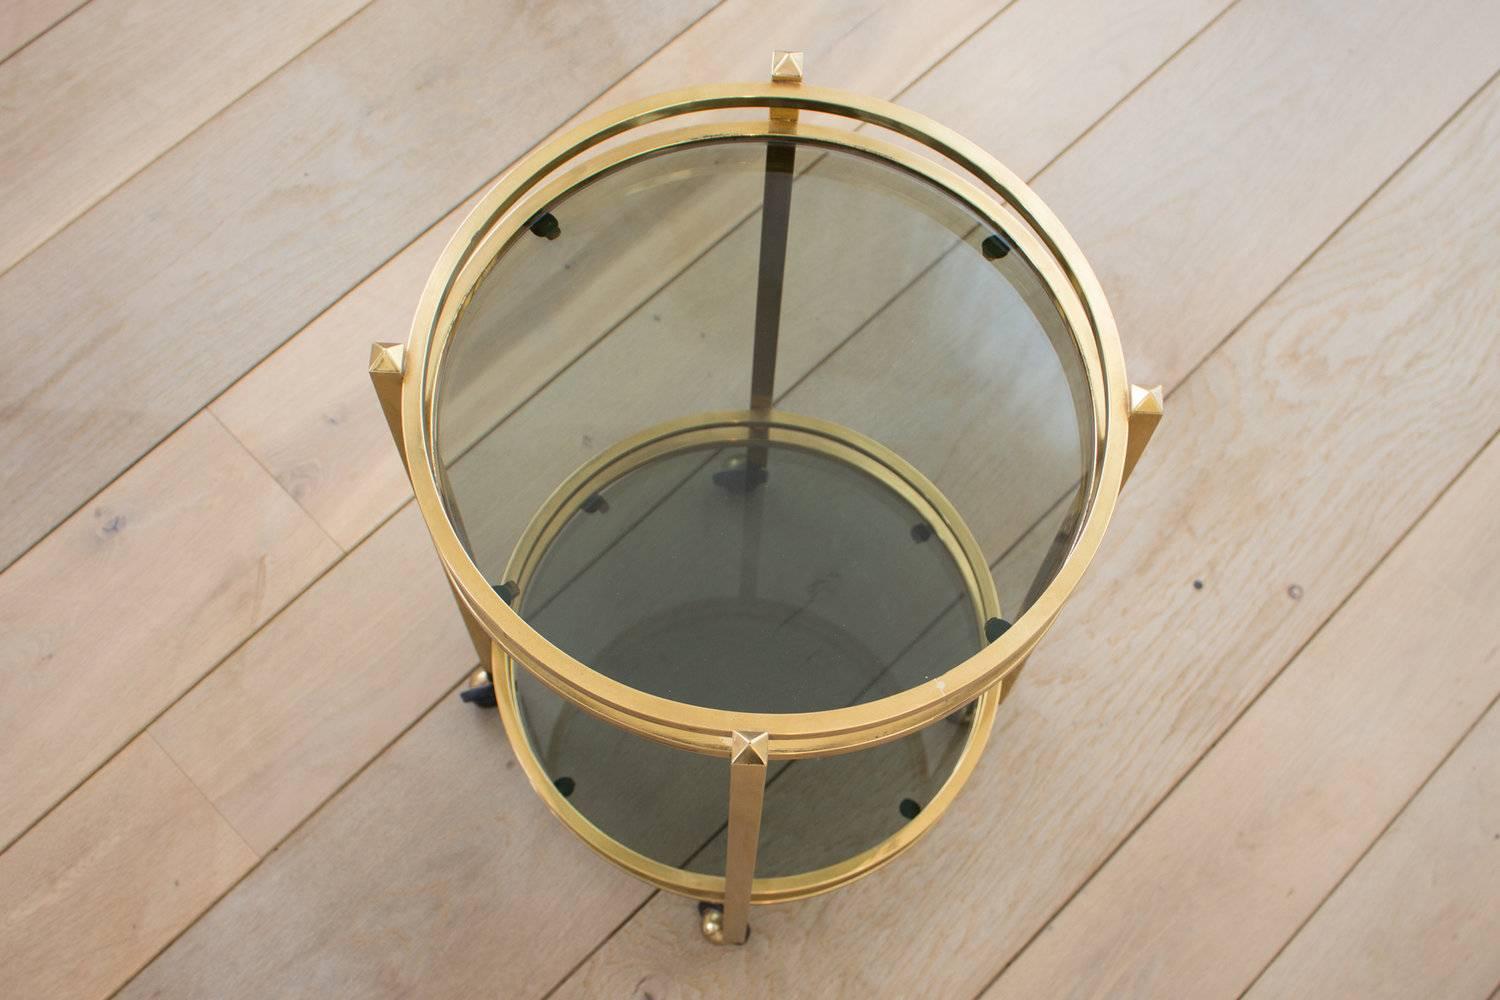 Mid-Century Modern, elegant, brass side table with two-tier smoked glass inlays. The table is easy to move due to the adjustable wheels underneath. Very practical due to its size yet very decorative.
Never enough gold we say.